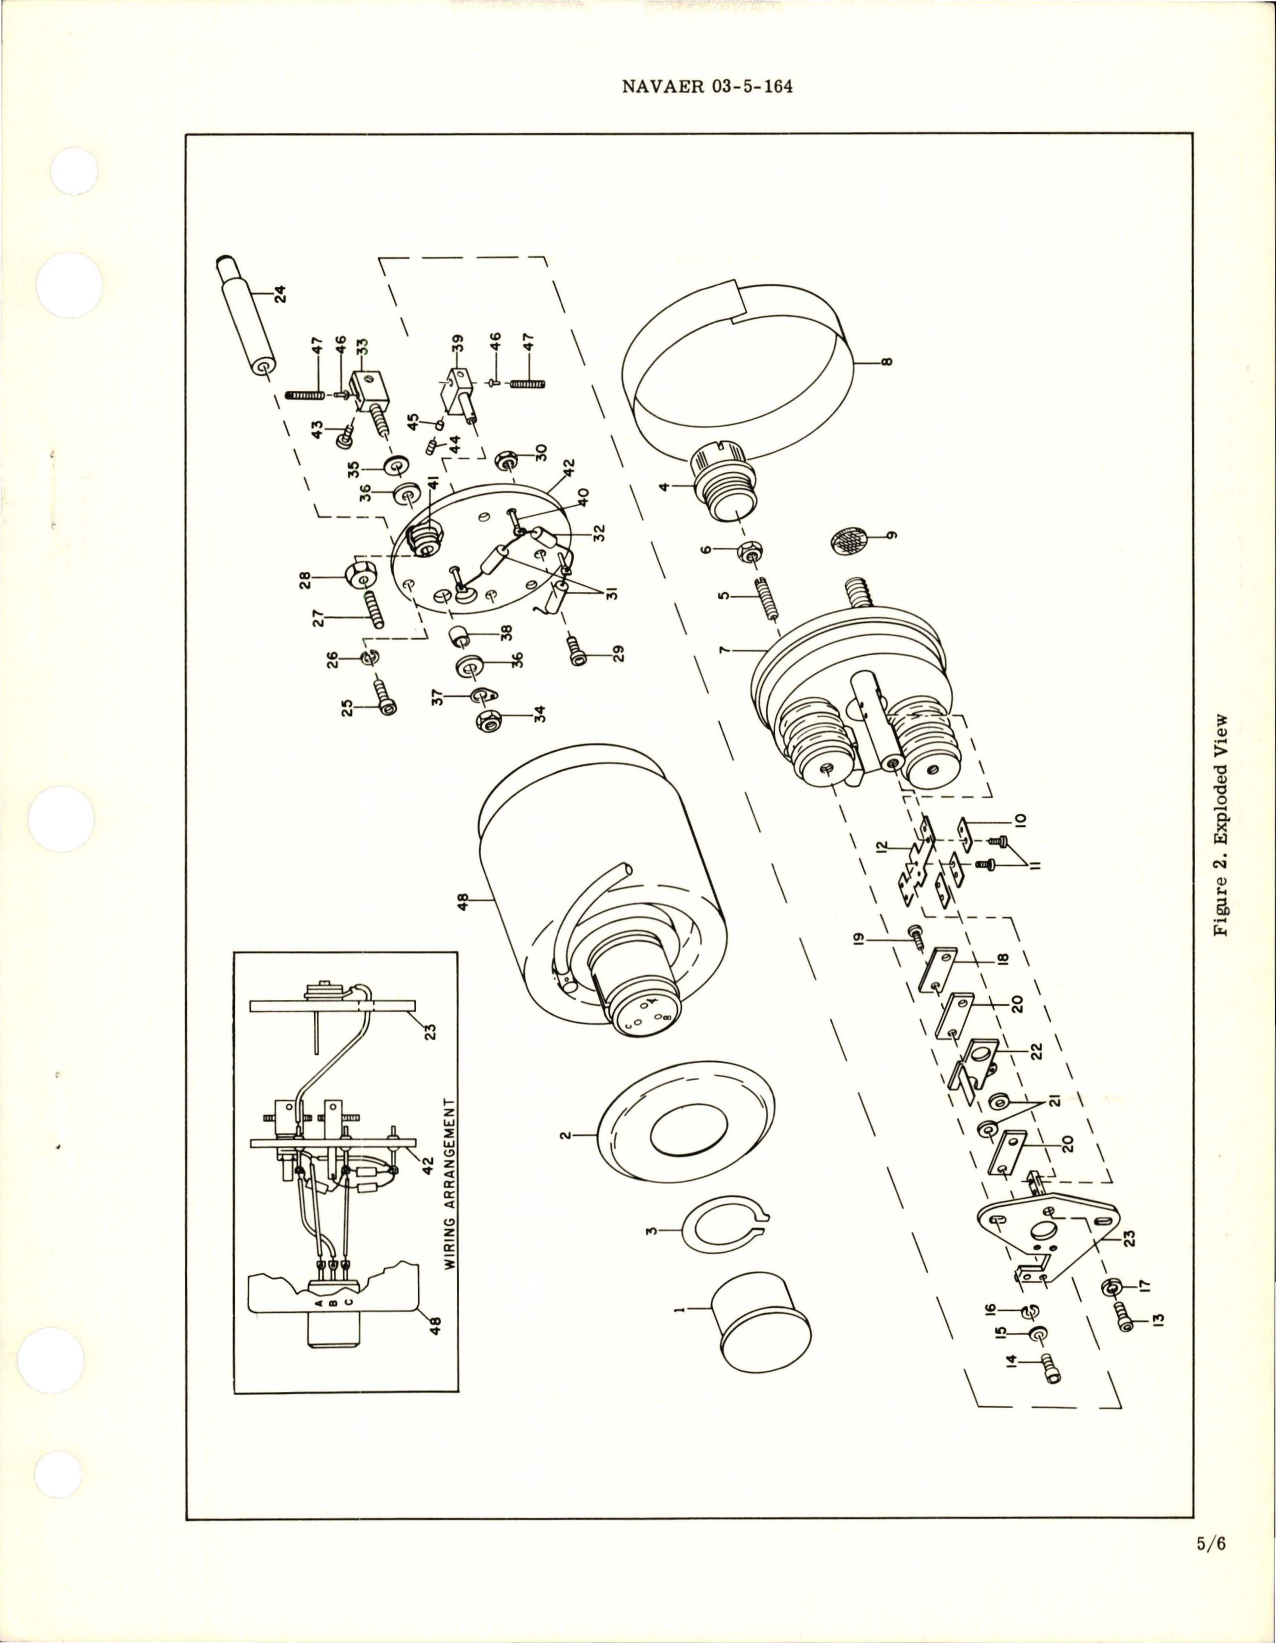 Sample page 5 from AirCorps Library document: Overhaul Instructions with Parts Breakdown for Engine Oil Pressure Switch - Type 3153-3A-250